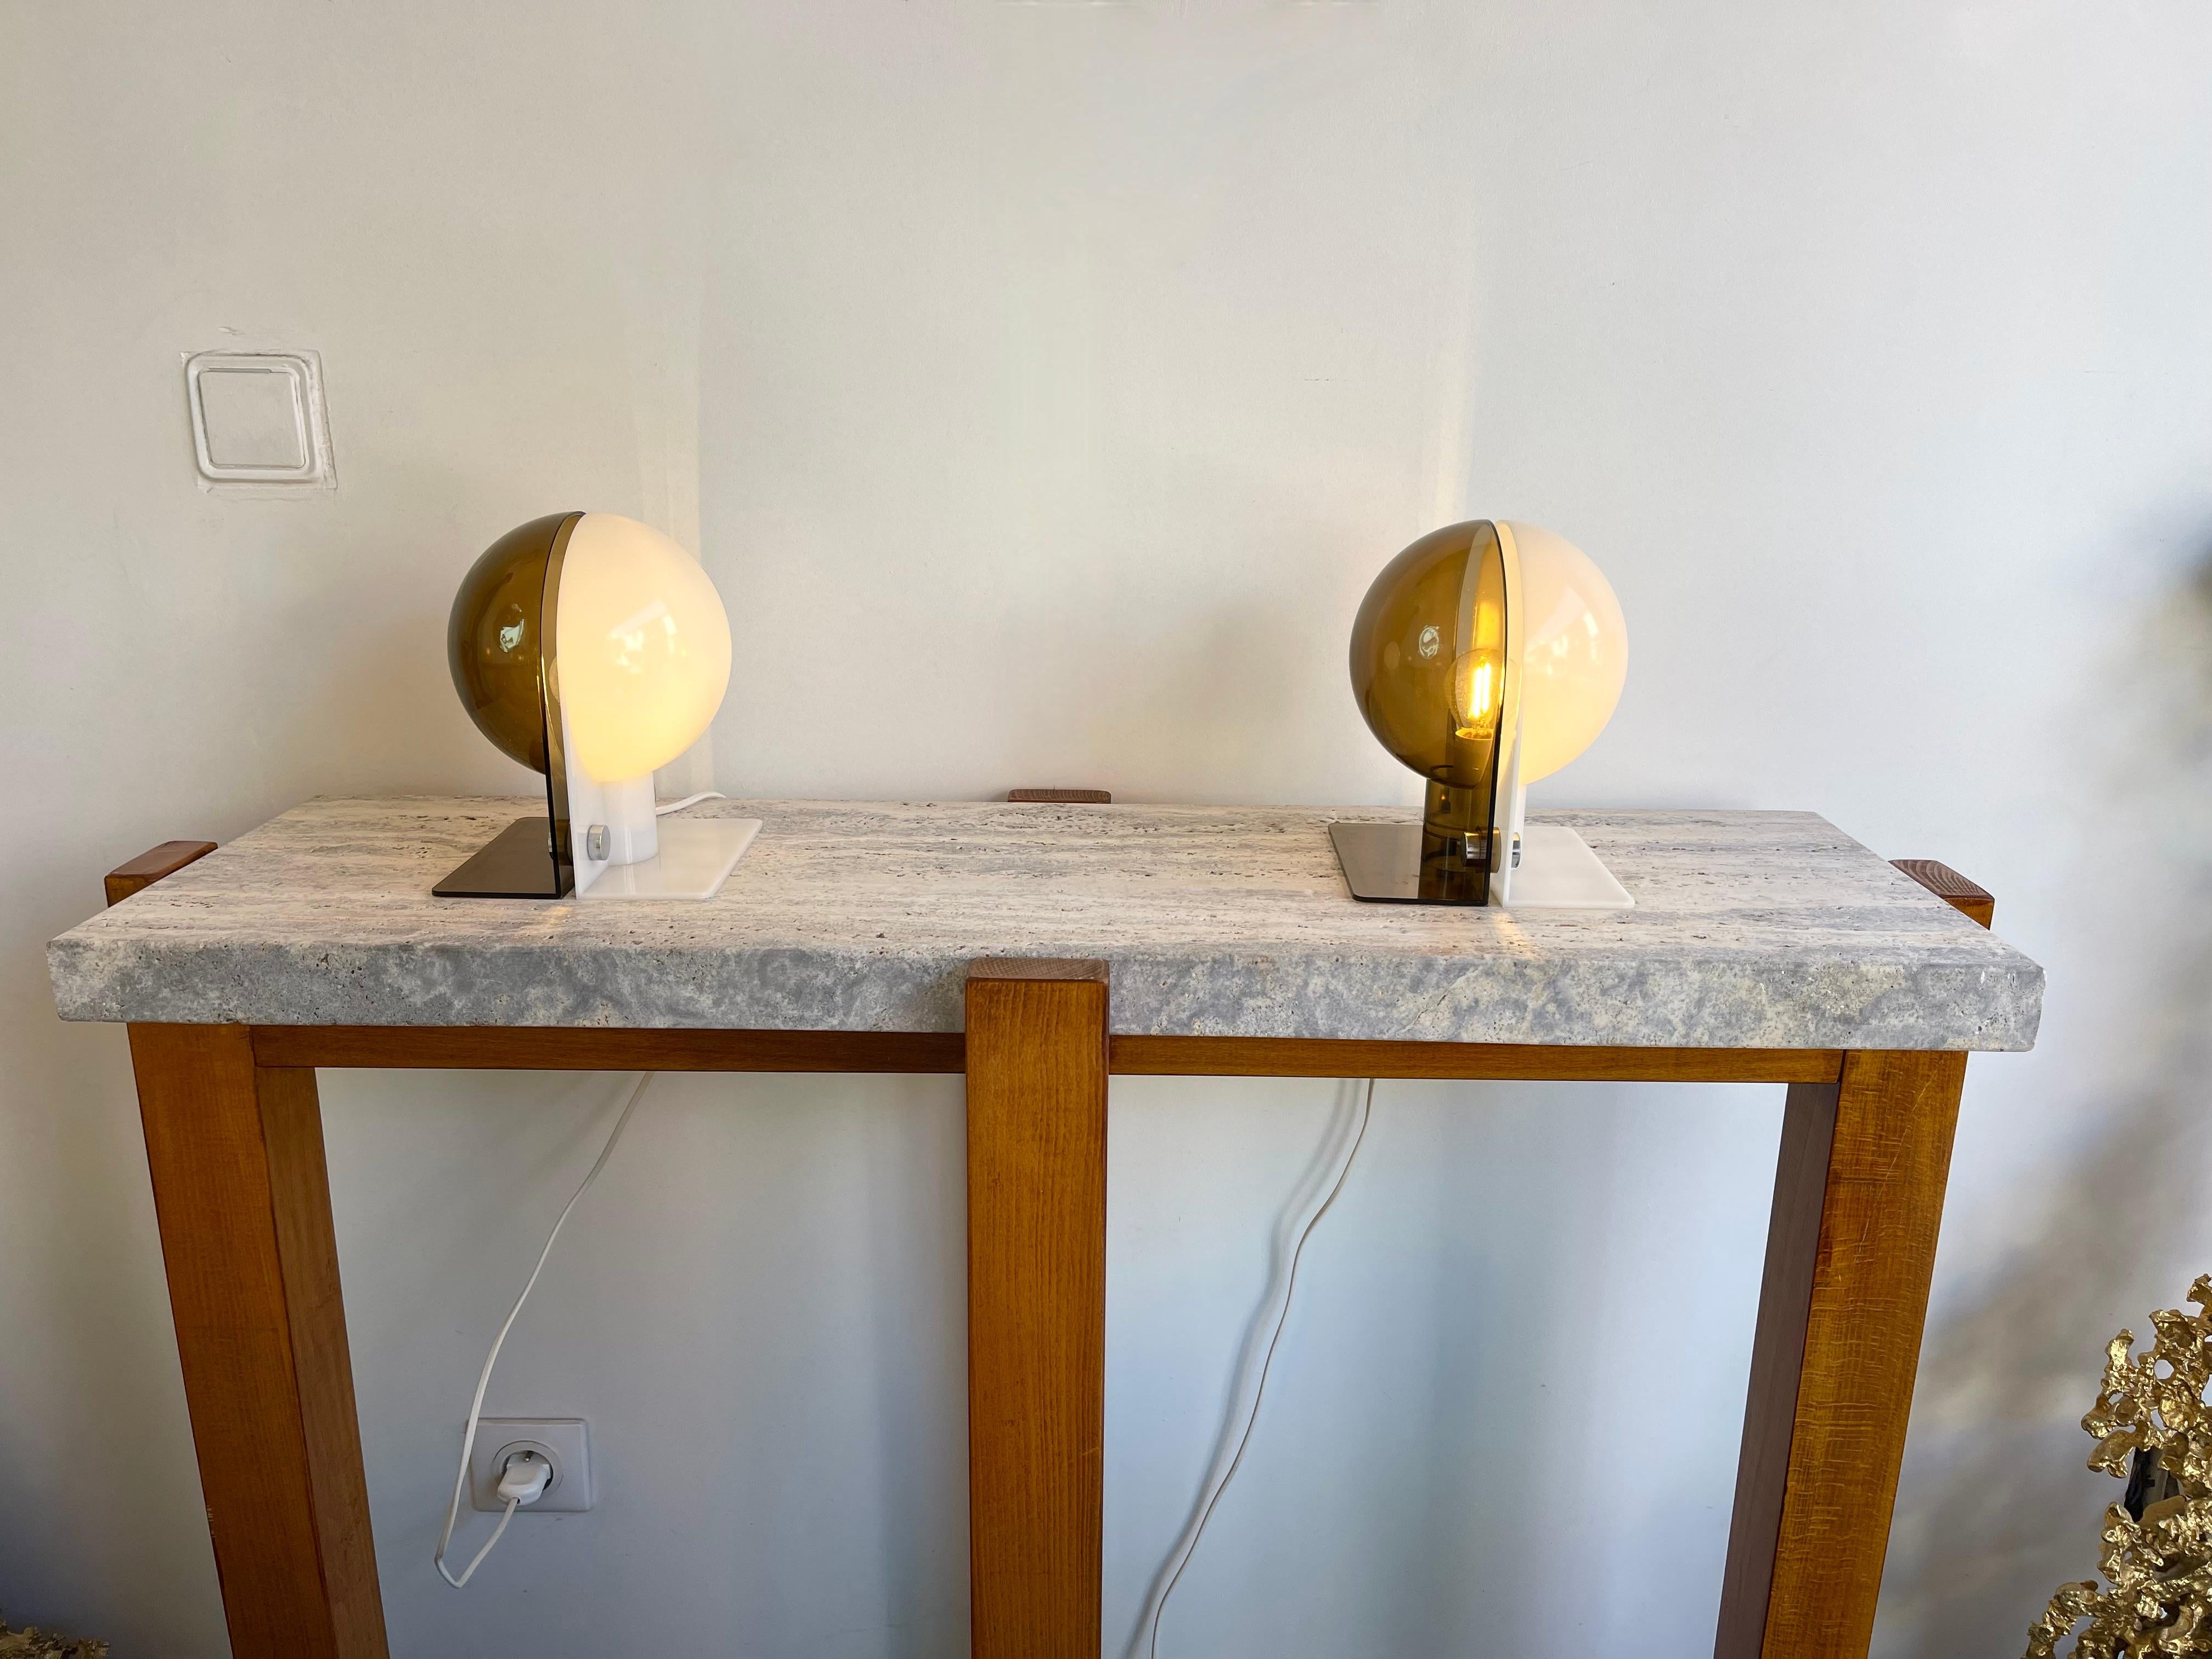 Pair of Lucite Lamps Sirio by Brazzoni Lampa for Harvey Guzzini. Italy, 1970s For Sale 5